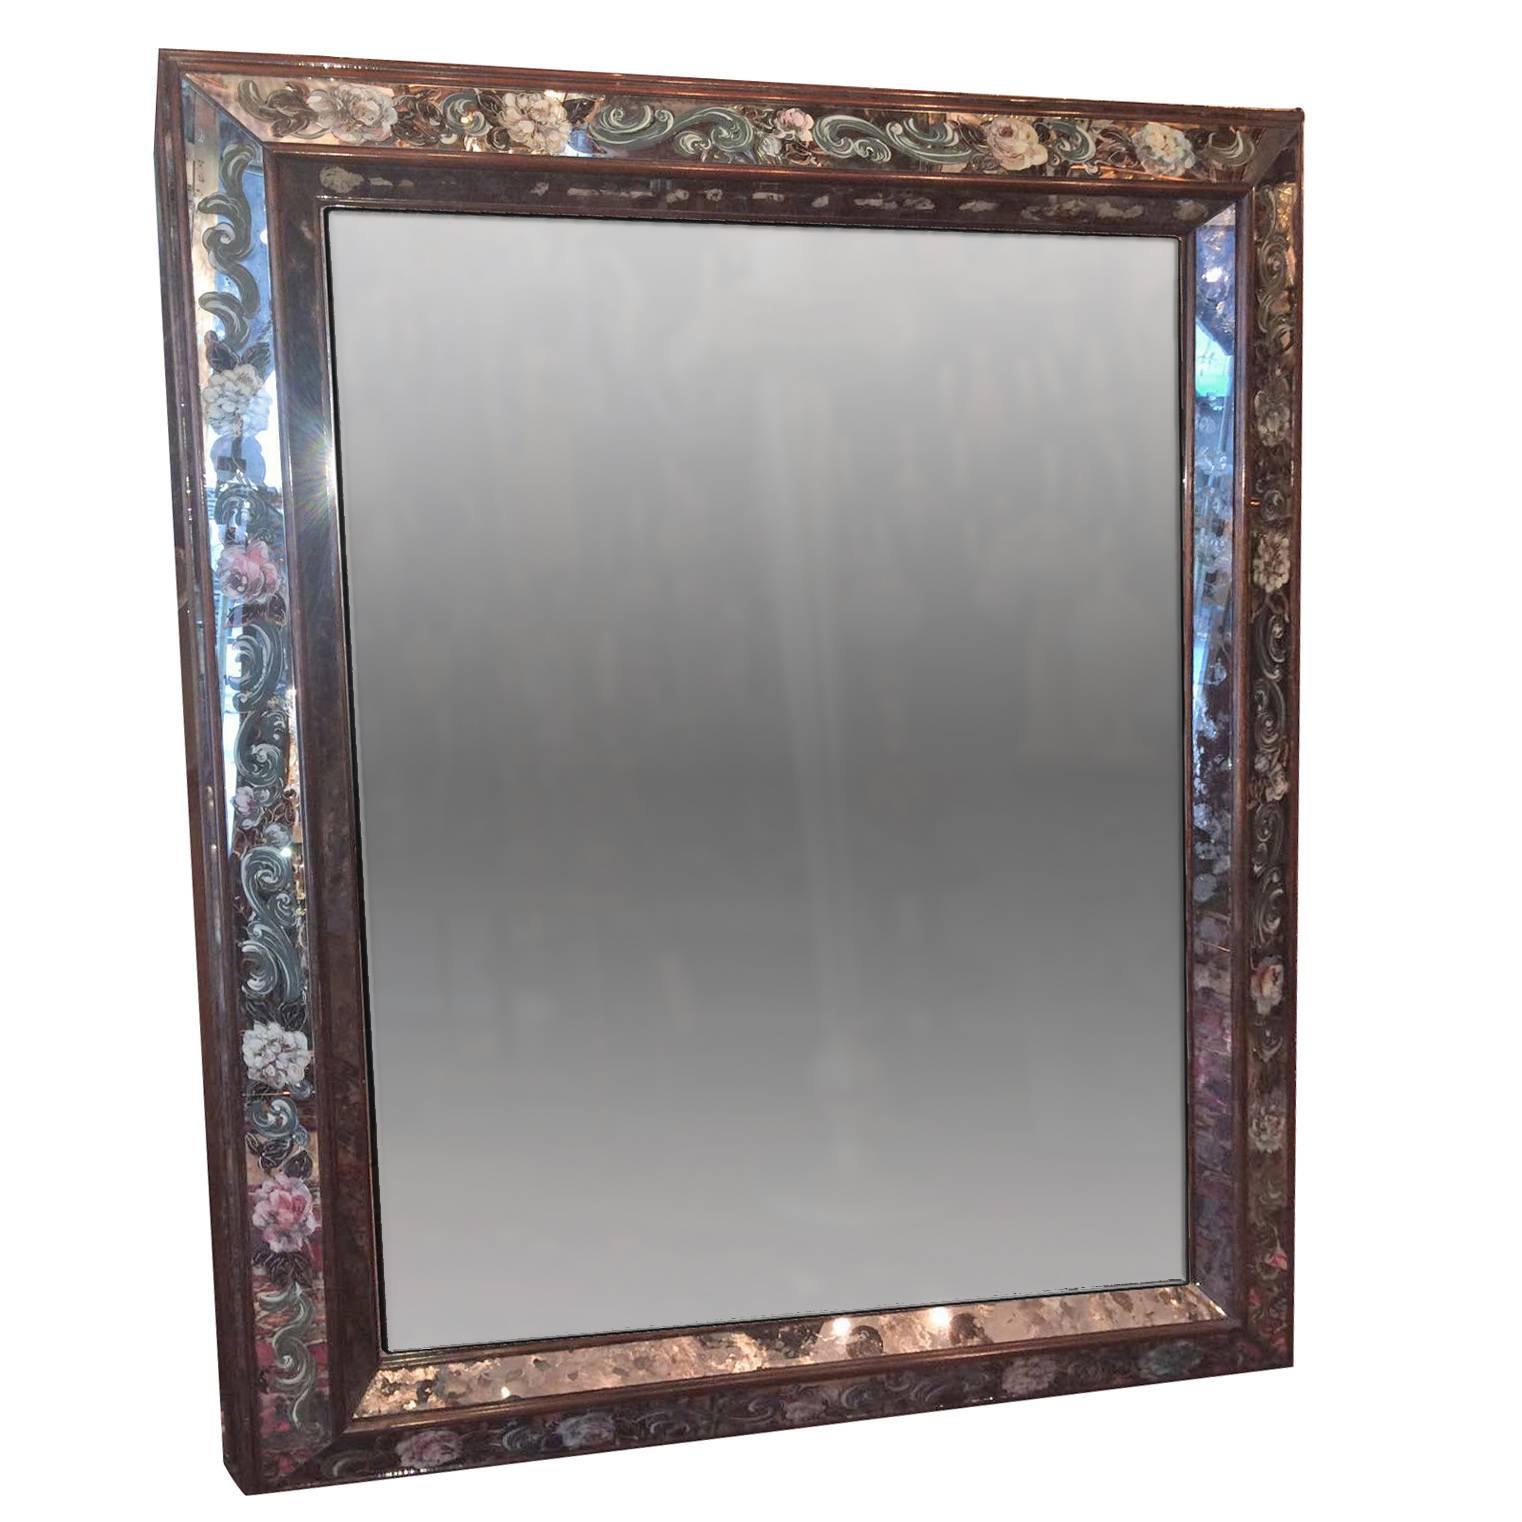 Reverse Painted Mirror with Foliage Motif